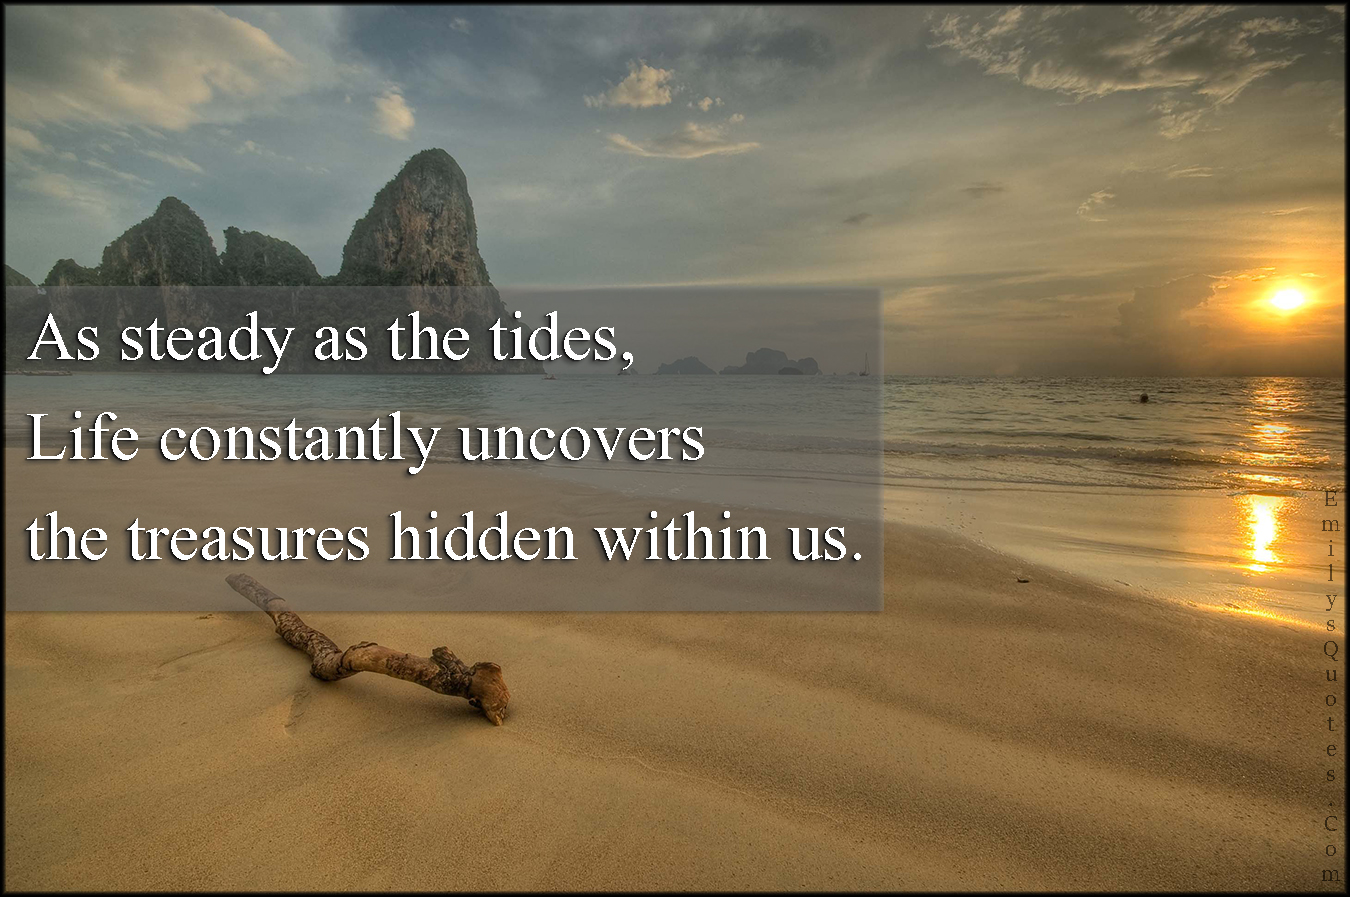 As steady as the tides, Life constantly uncovers the treasures hidden within us